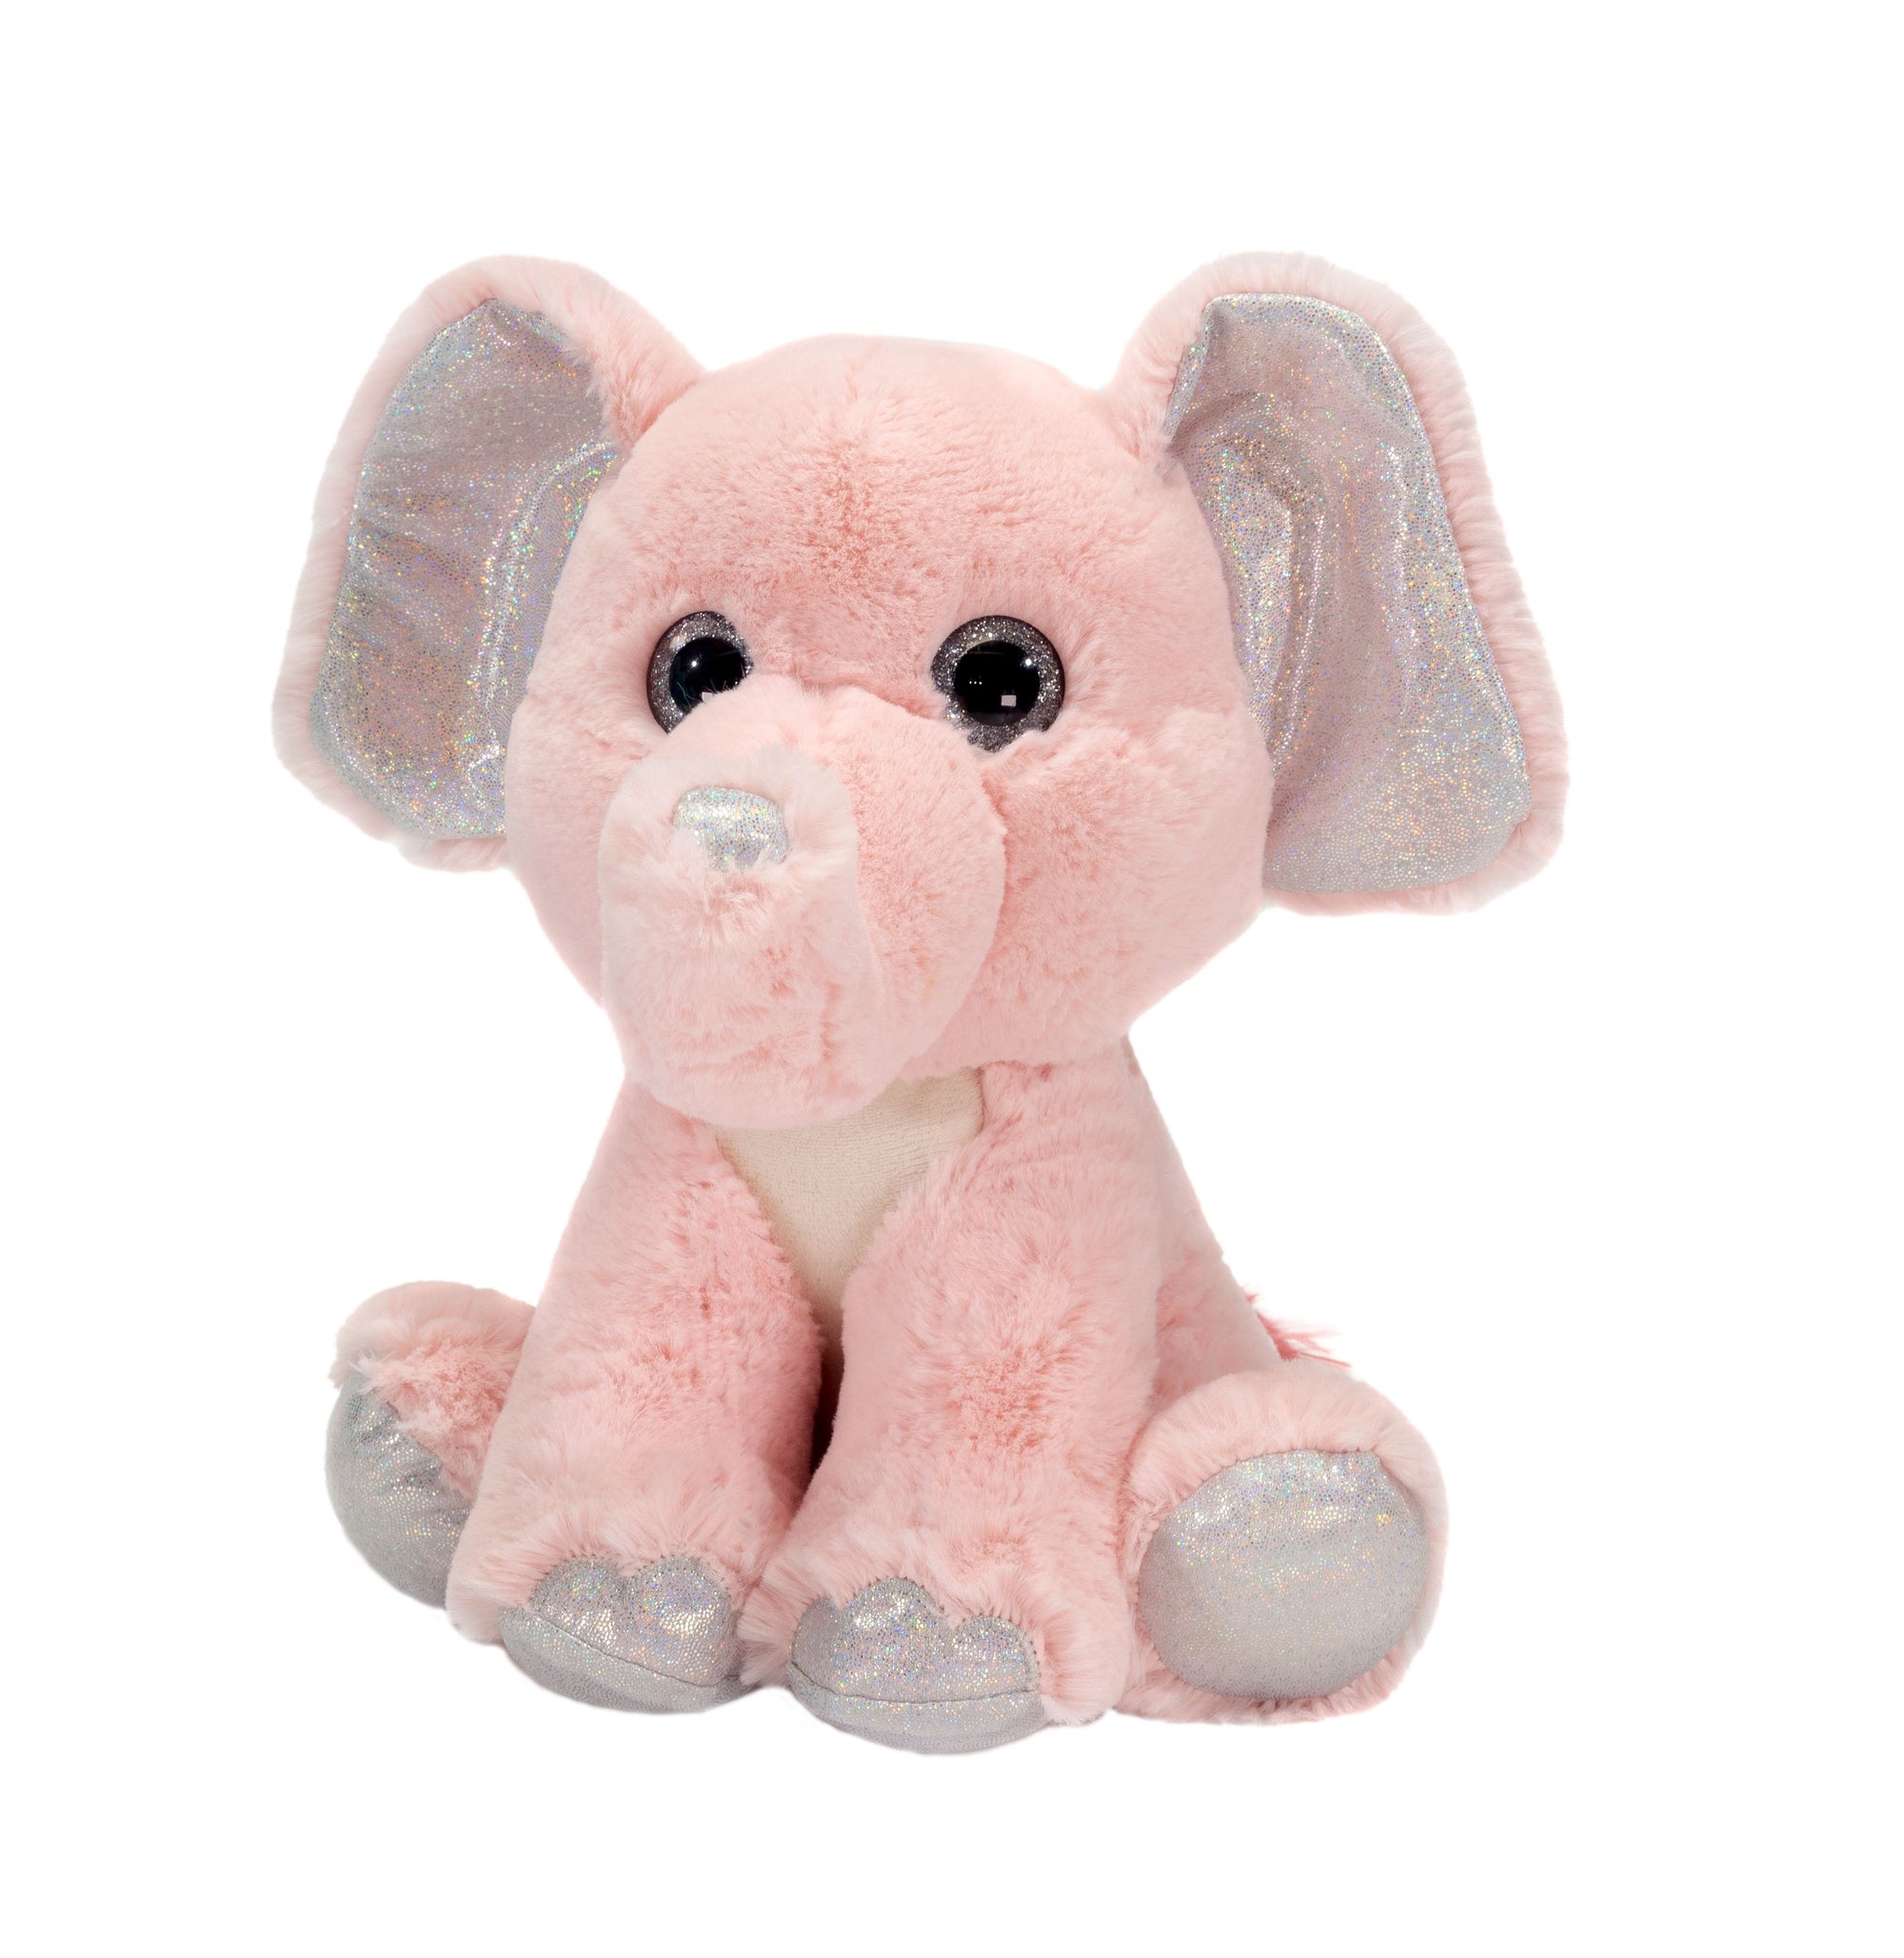 COTTON CANDY CUTIES - 10IN ELEPHANTS PINK OR TURQUOISE